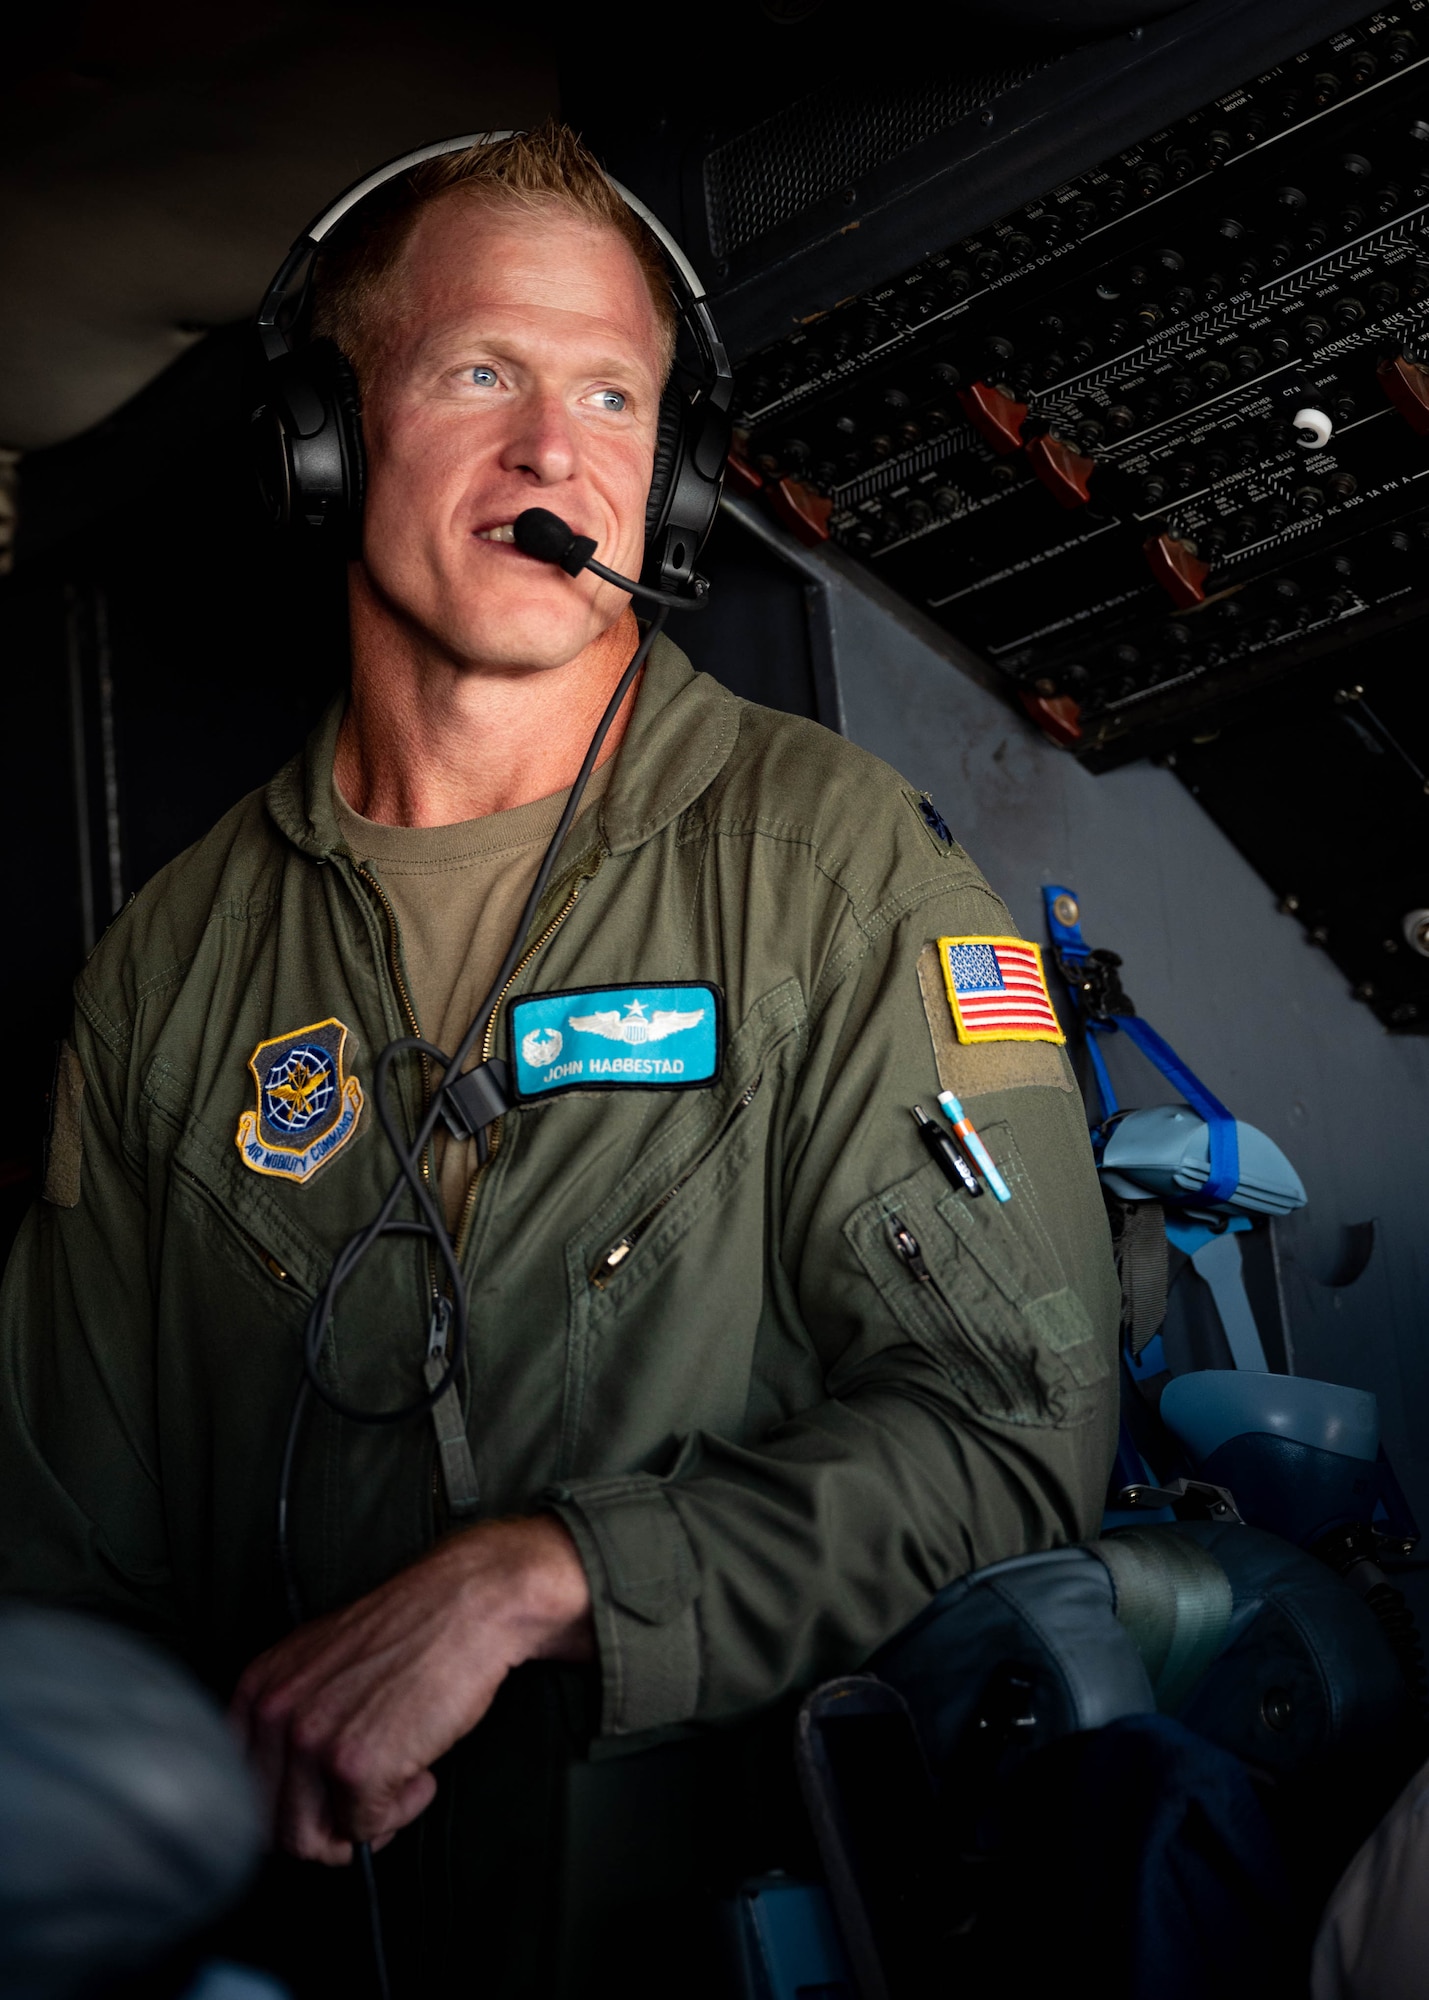 Lt. Col. John Habbestad, 9th Airlift Squadron commander, observes  the flight deck of a C-5M Super Galaxy while on a training mission over New York, June 23, 2021. This flight commemorated Habbestad’s final flight as the 9th AS commander. The 9th AS routinely trains to provide global reach with unique outsized and oversized airlift capabilities on the C-5. (U.S. Air Force photo by Senior Airman Faith Schaefer)